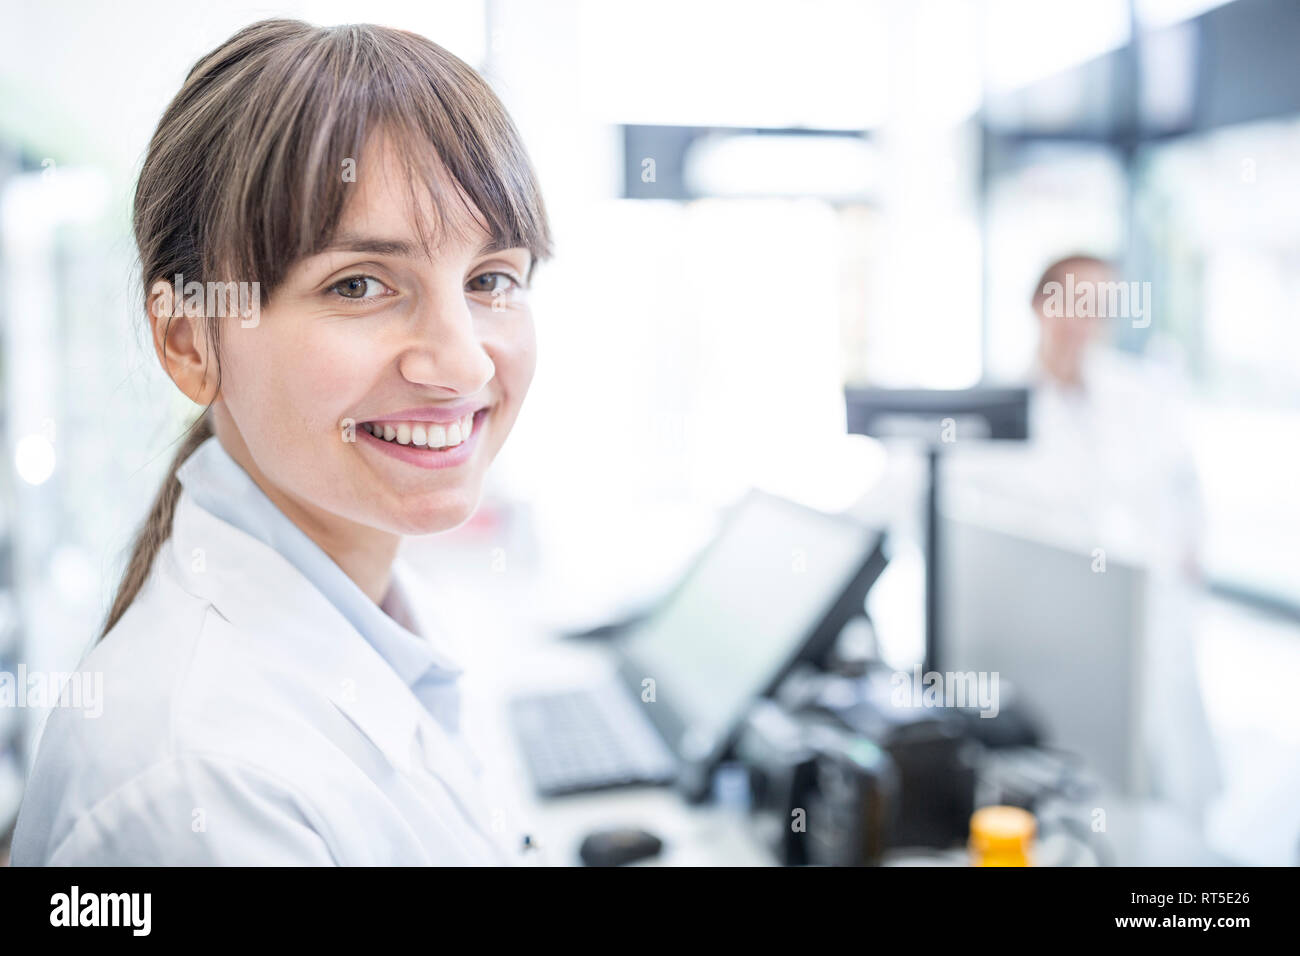 Portrait of smiling woman in lab coat Stock Photo